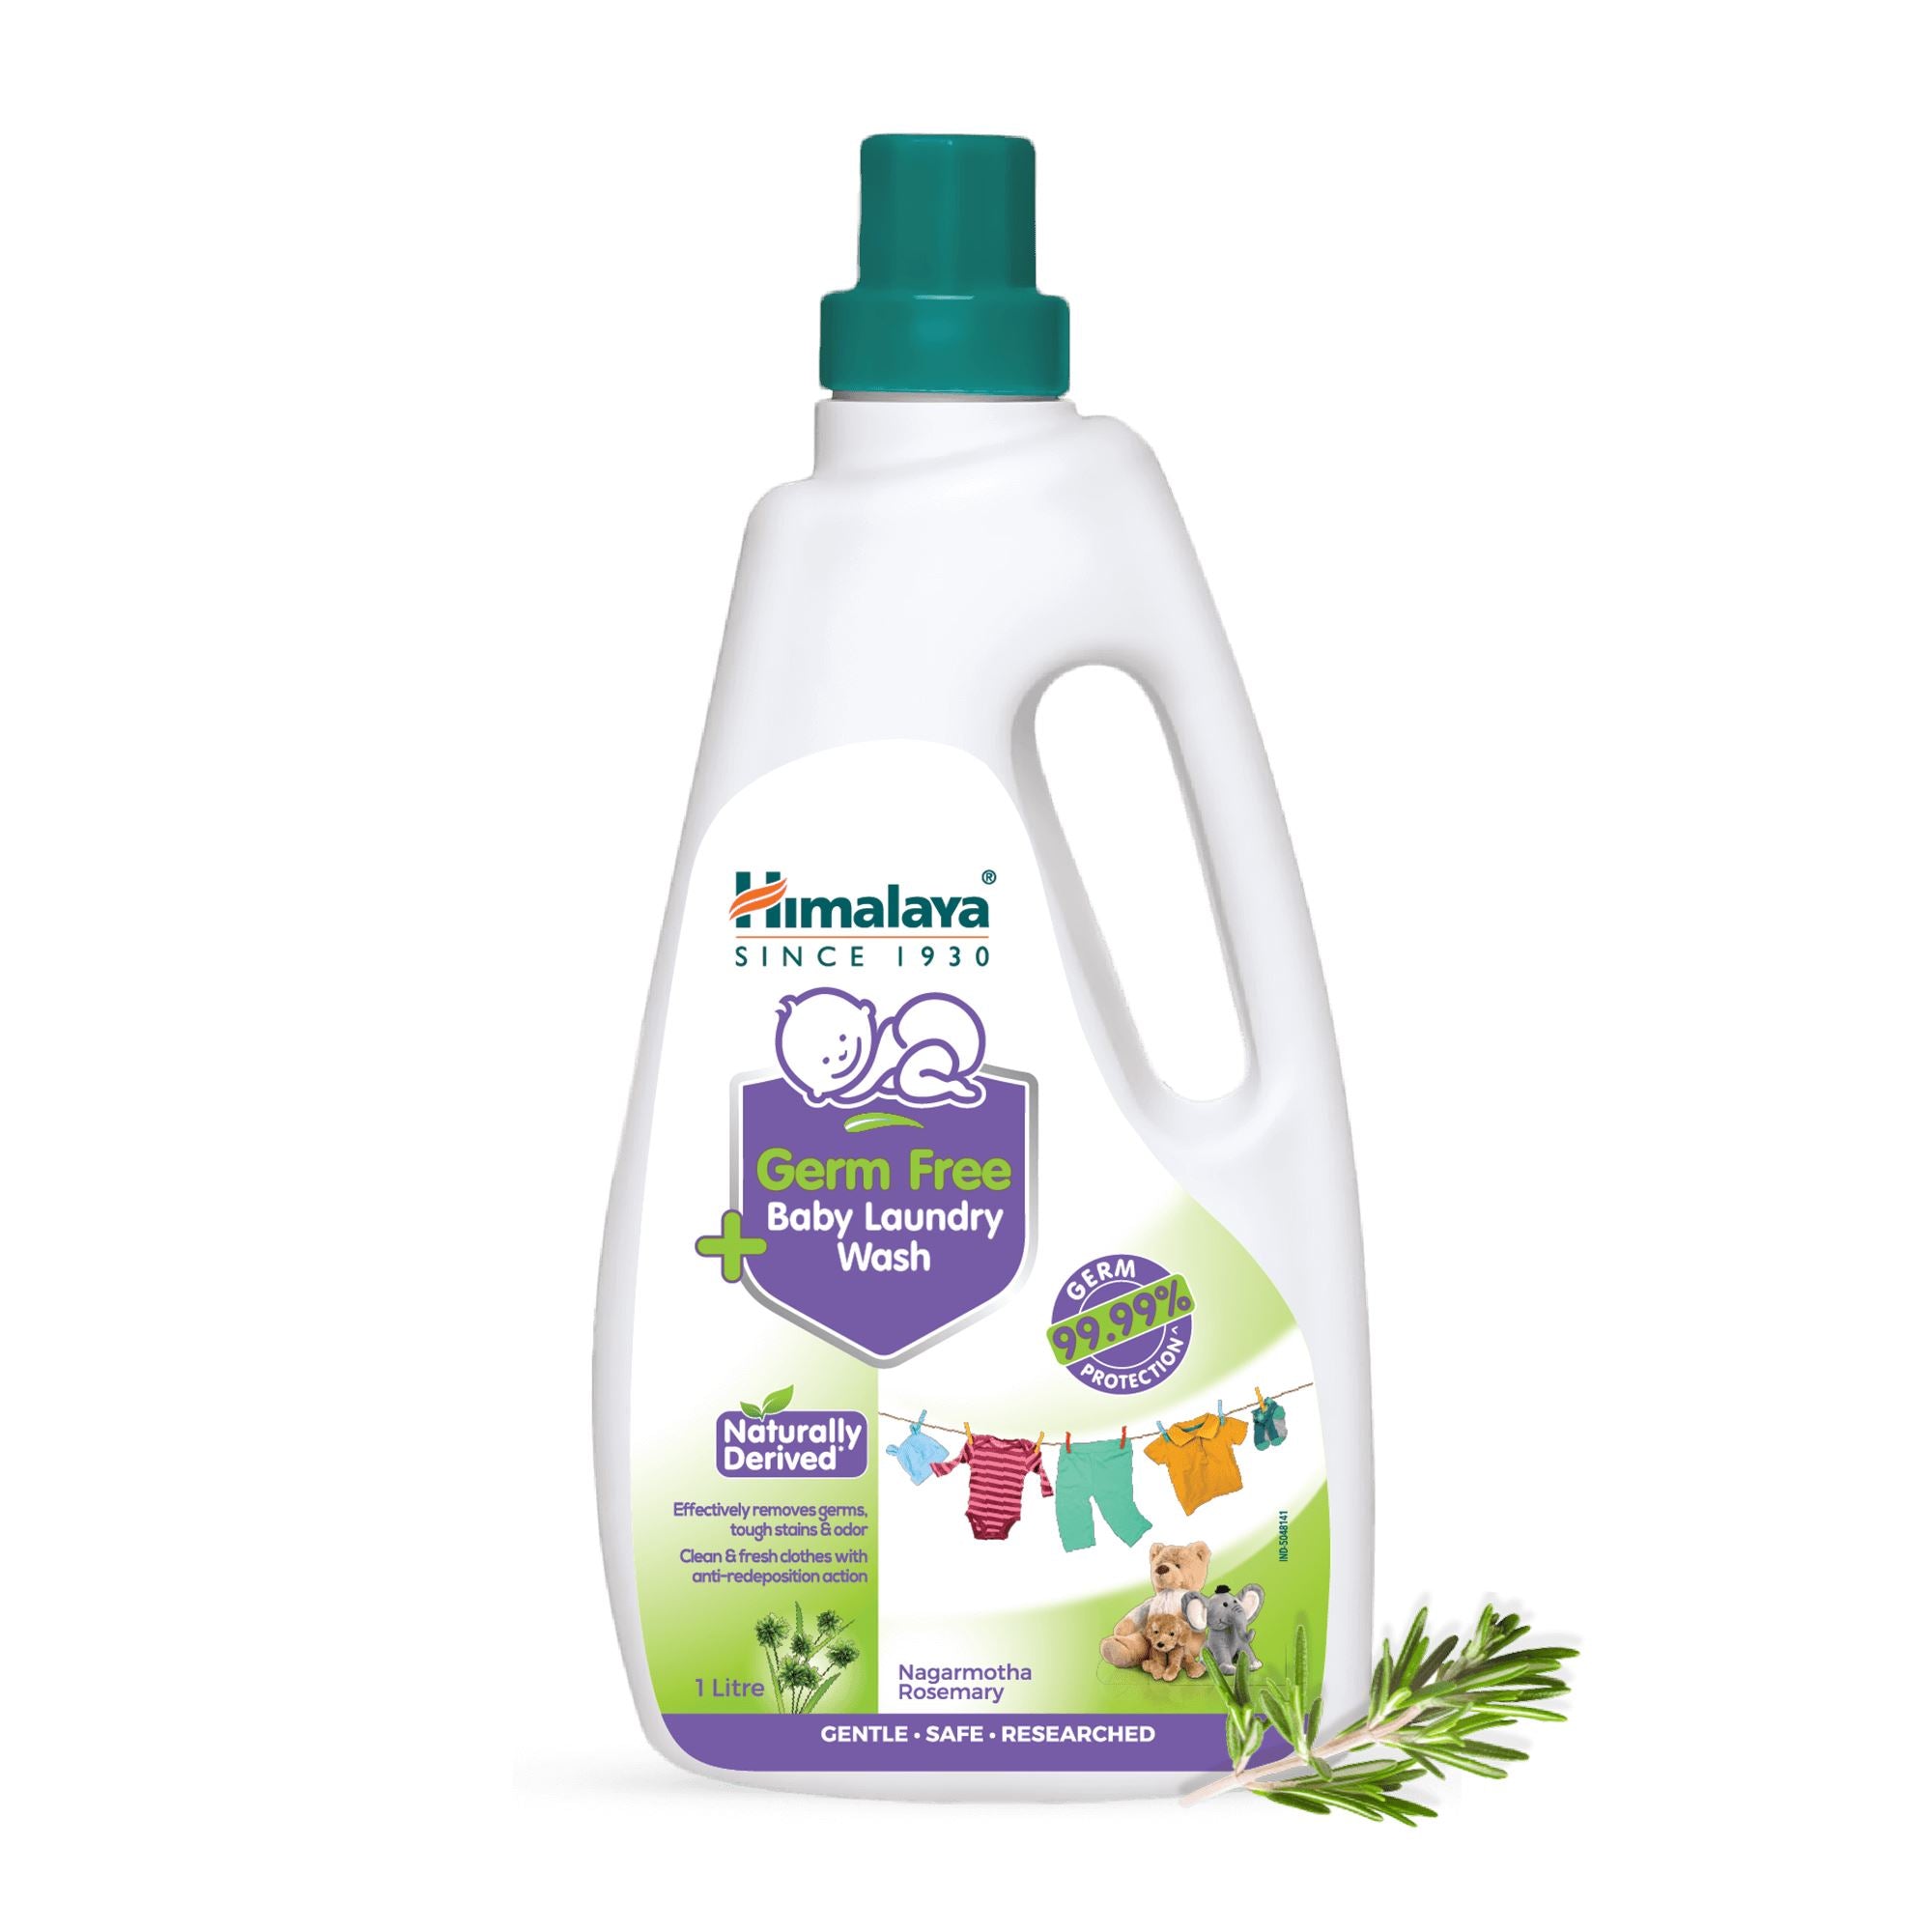 Himalaya Germ Free Baby Laundry Wash 1 Litre Bottle - Removes Germs and Odor